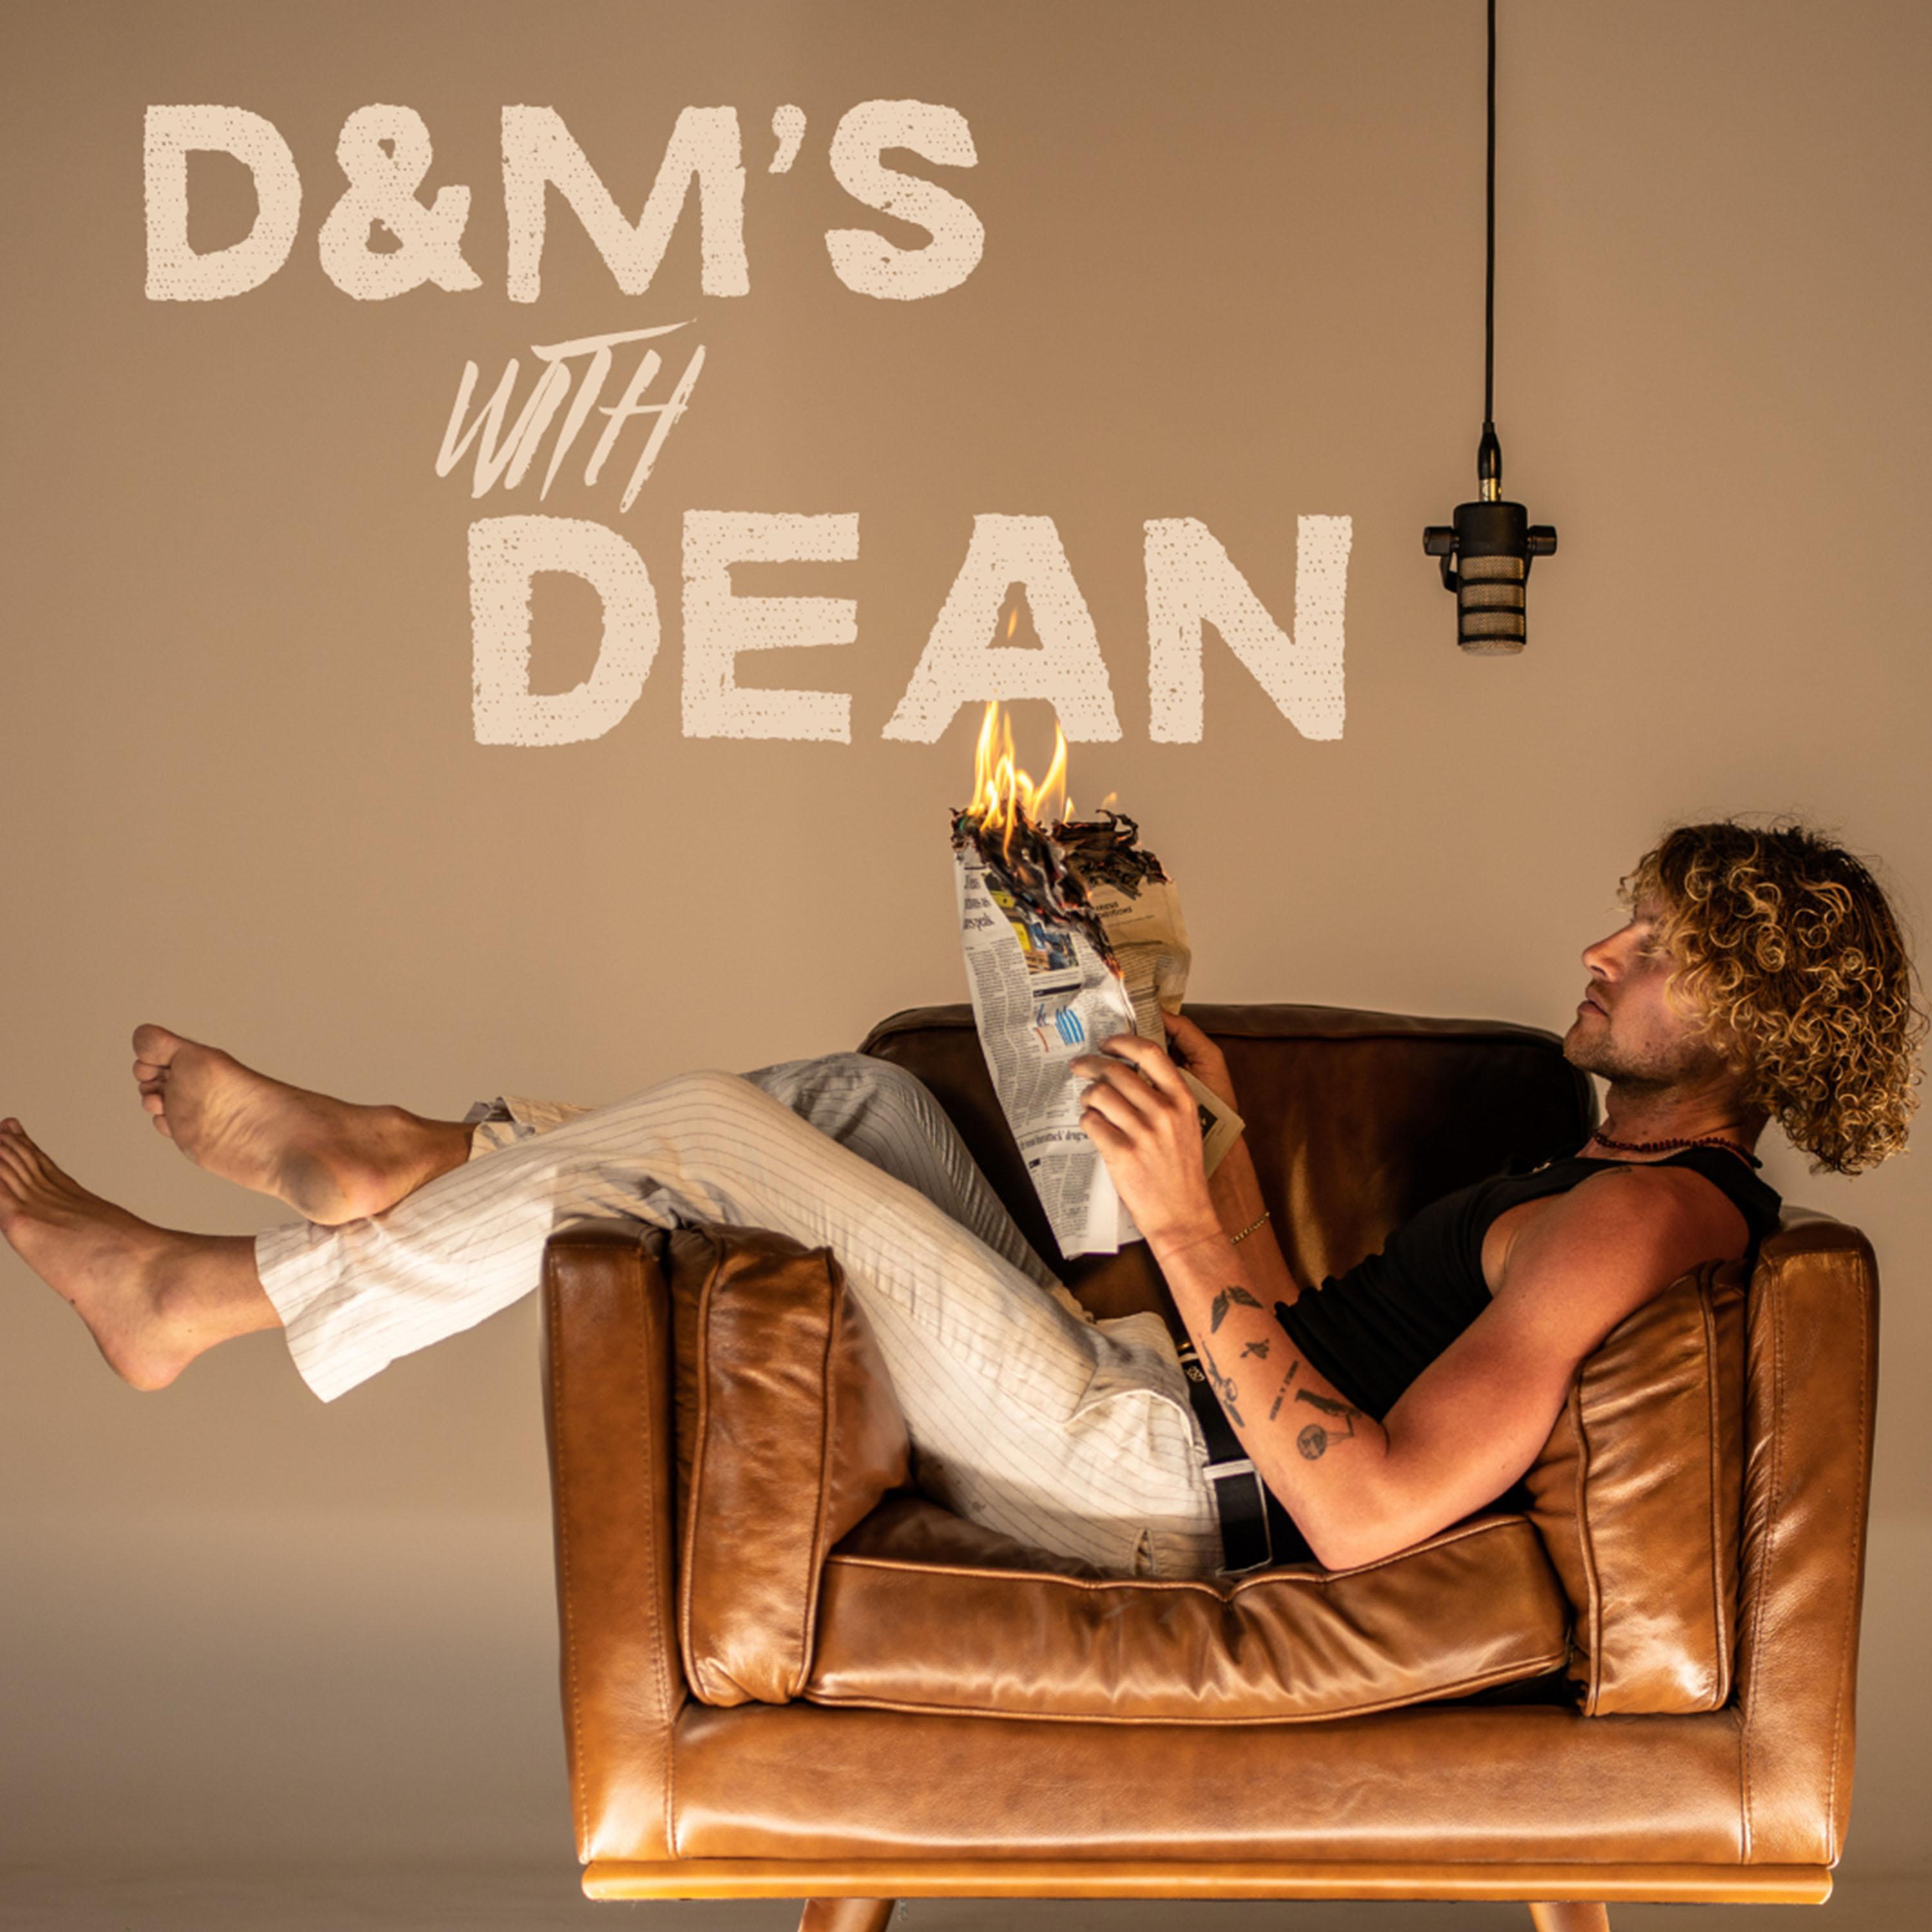 D&M's with DEAN